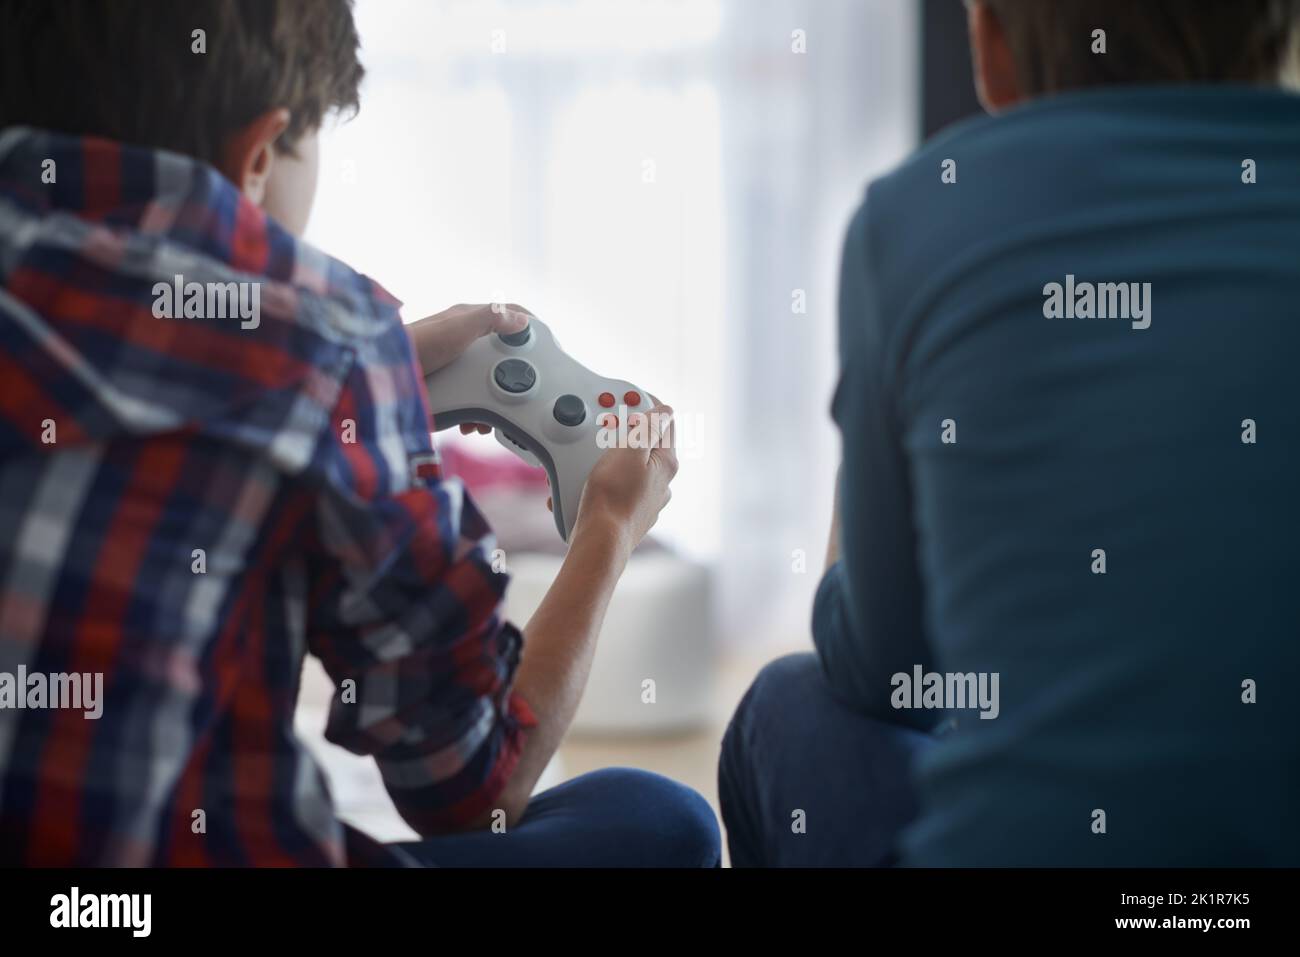 Ive got this in the bag.Rear view of two boys playing video games. Stock Photo